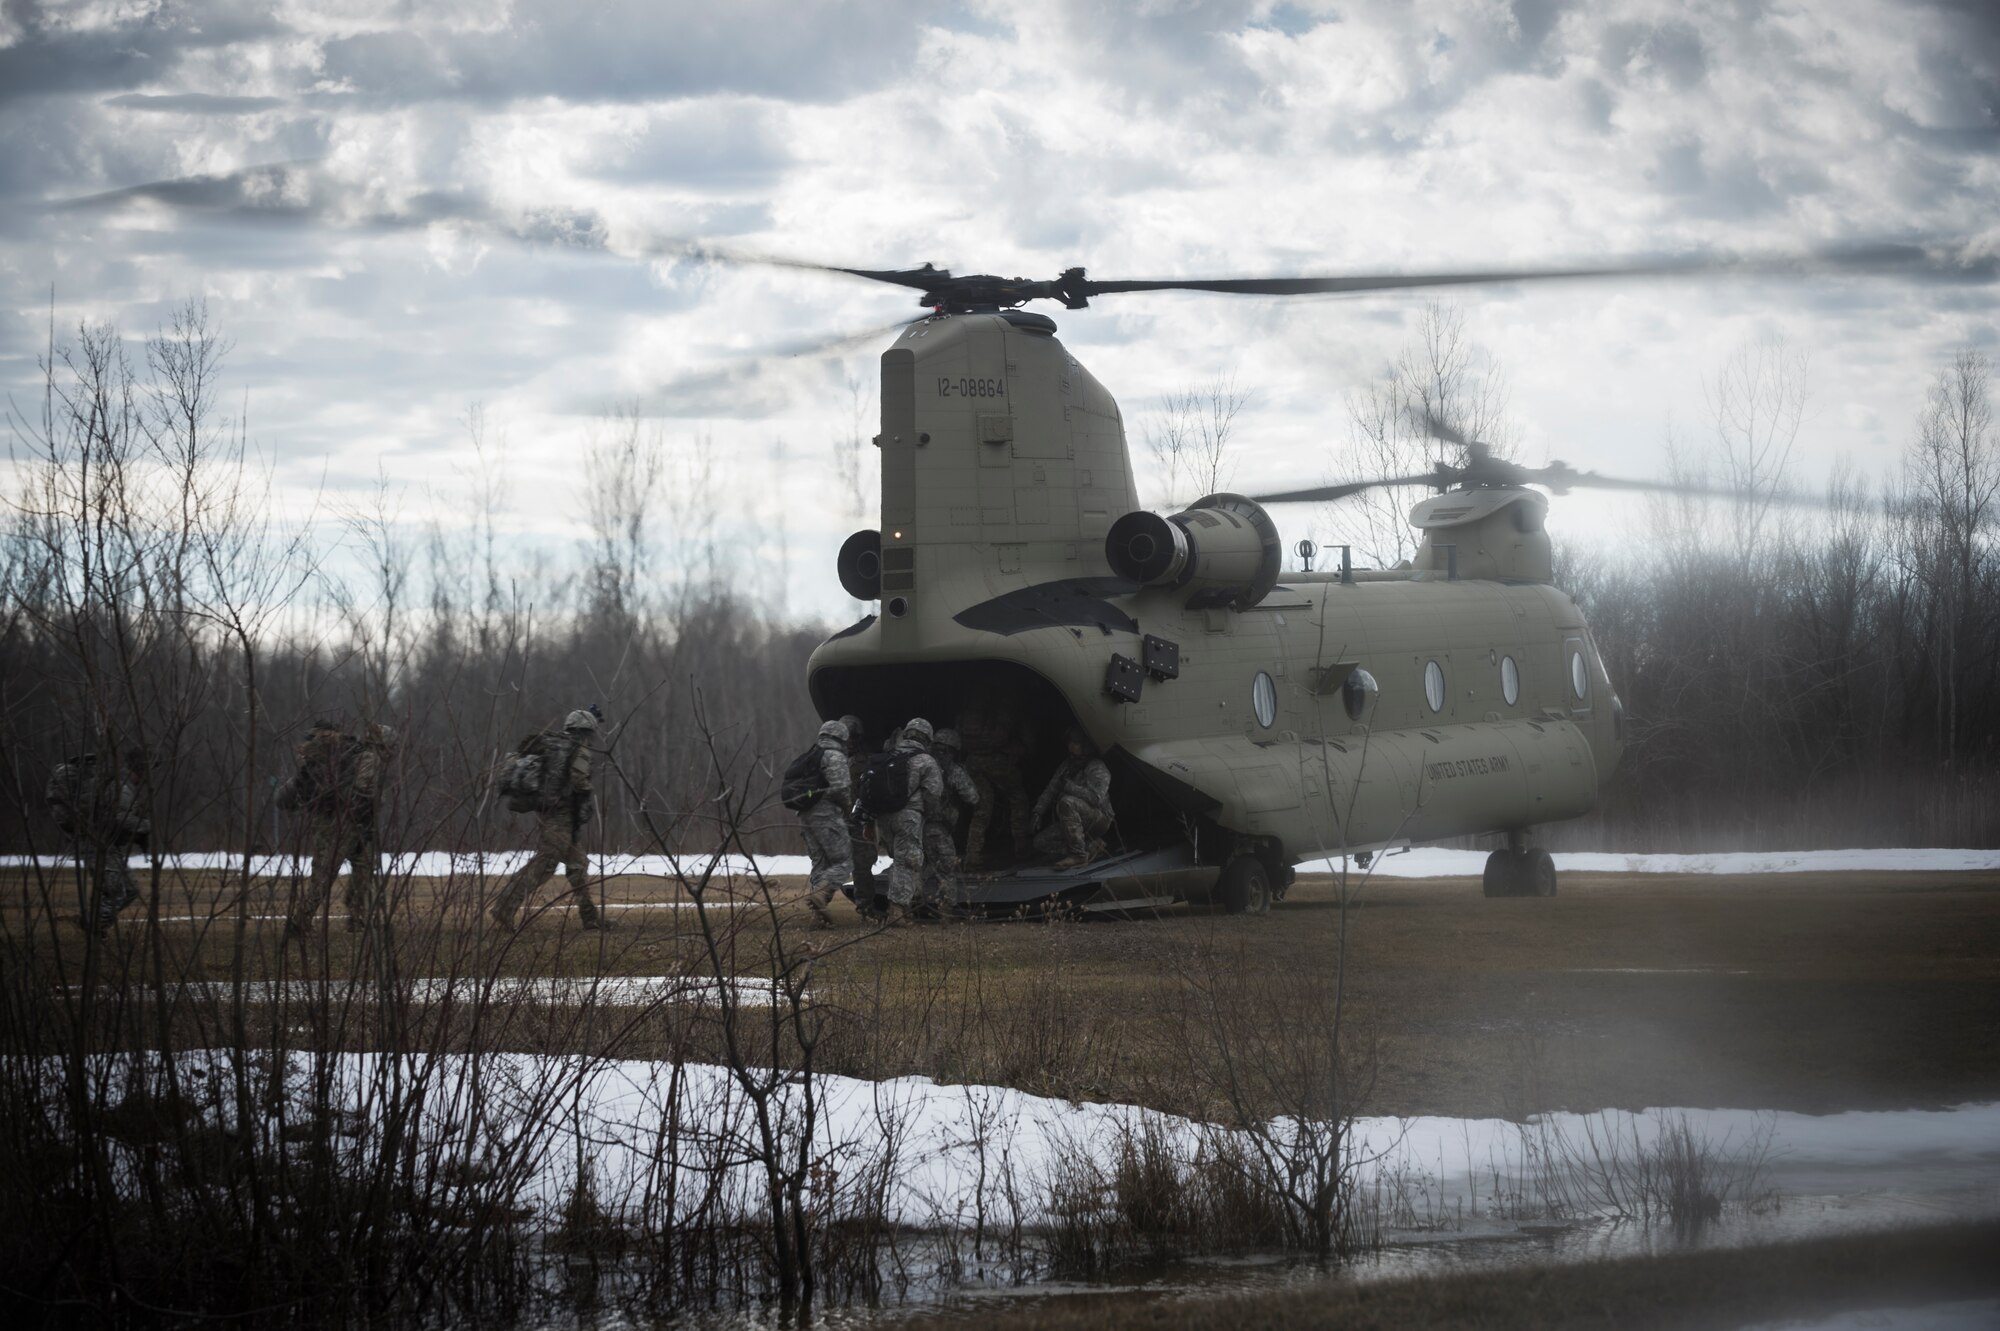 Soldiers from C Troop 2/101 Cavalry, from Buffalo, simulate breaking contact and boarding a U.S. Army CH-47 Chinook helicopter for extraction, Youngstown, NY, Feb. 20, 2016. The Soldiers are training in preparation for larger scale exercises to be held throughout the year. (U.S. Air National Guard photo by Staff Sgt. Ryan Campbell/Released)